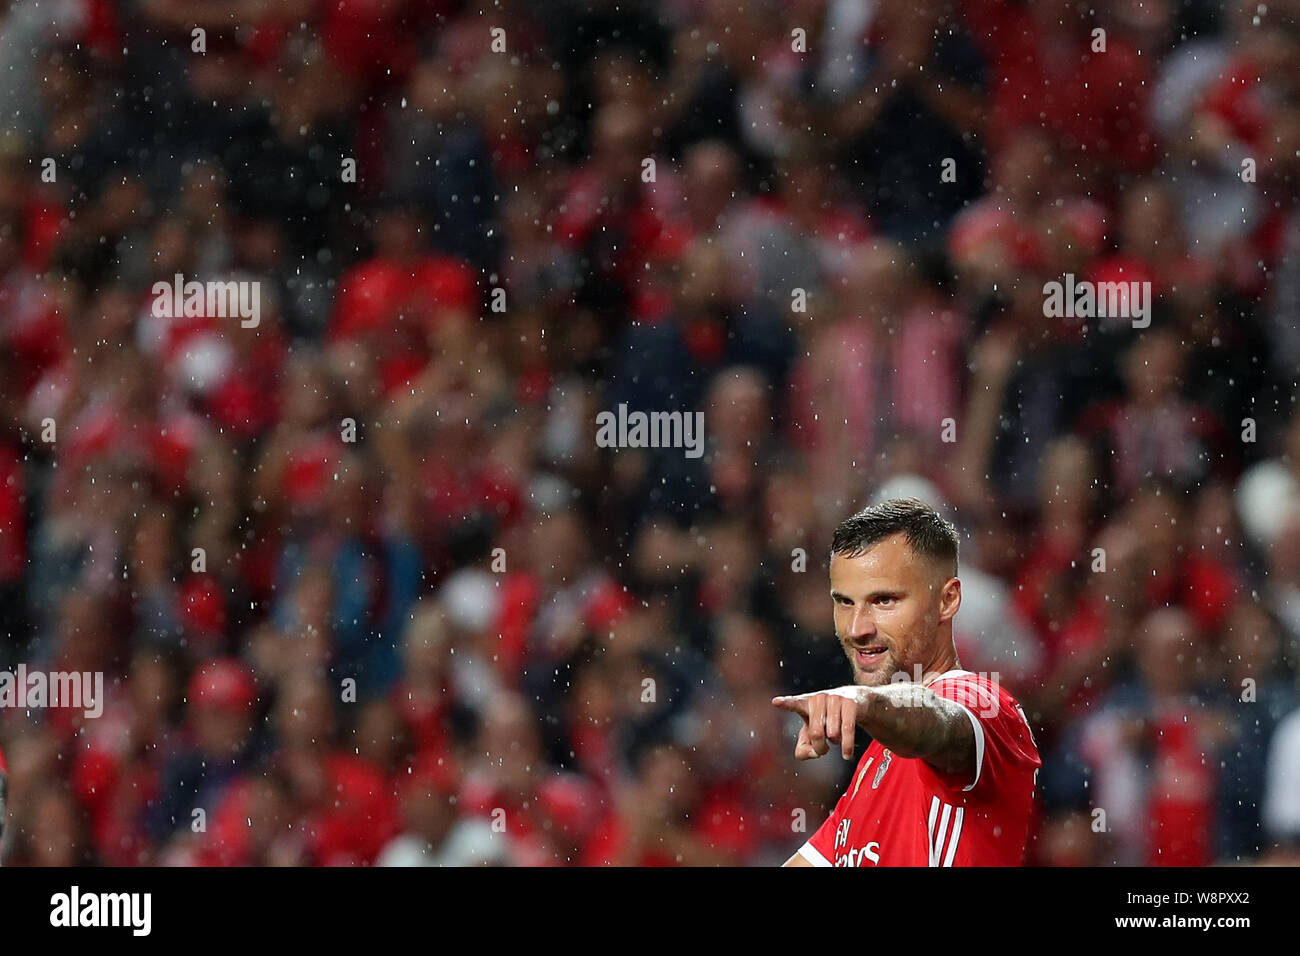 Lisbon, Portugal. 10th Aug, 2019. Haris Seferovic of Benfica celebrates after scoring a goal during the Primeira Liga football match between SL Benfica and FC Pacos Ferreira at the Luz stadium in Lisbon, Portugal on August 10, 2019. Credit: Pedro Fiuza/ZUMA Wire/Alamy Live News Stock Photo